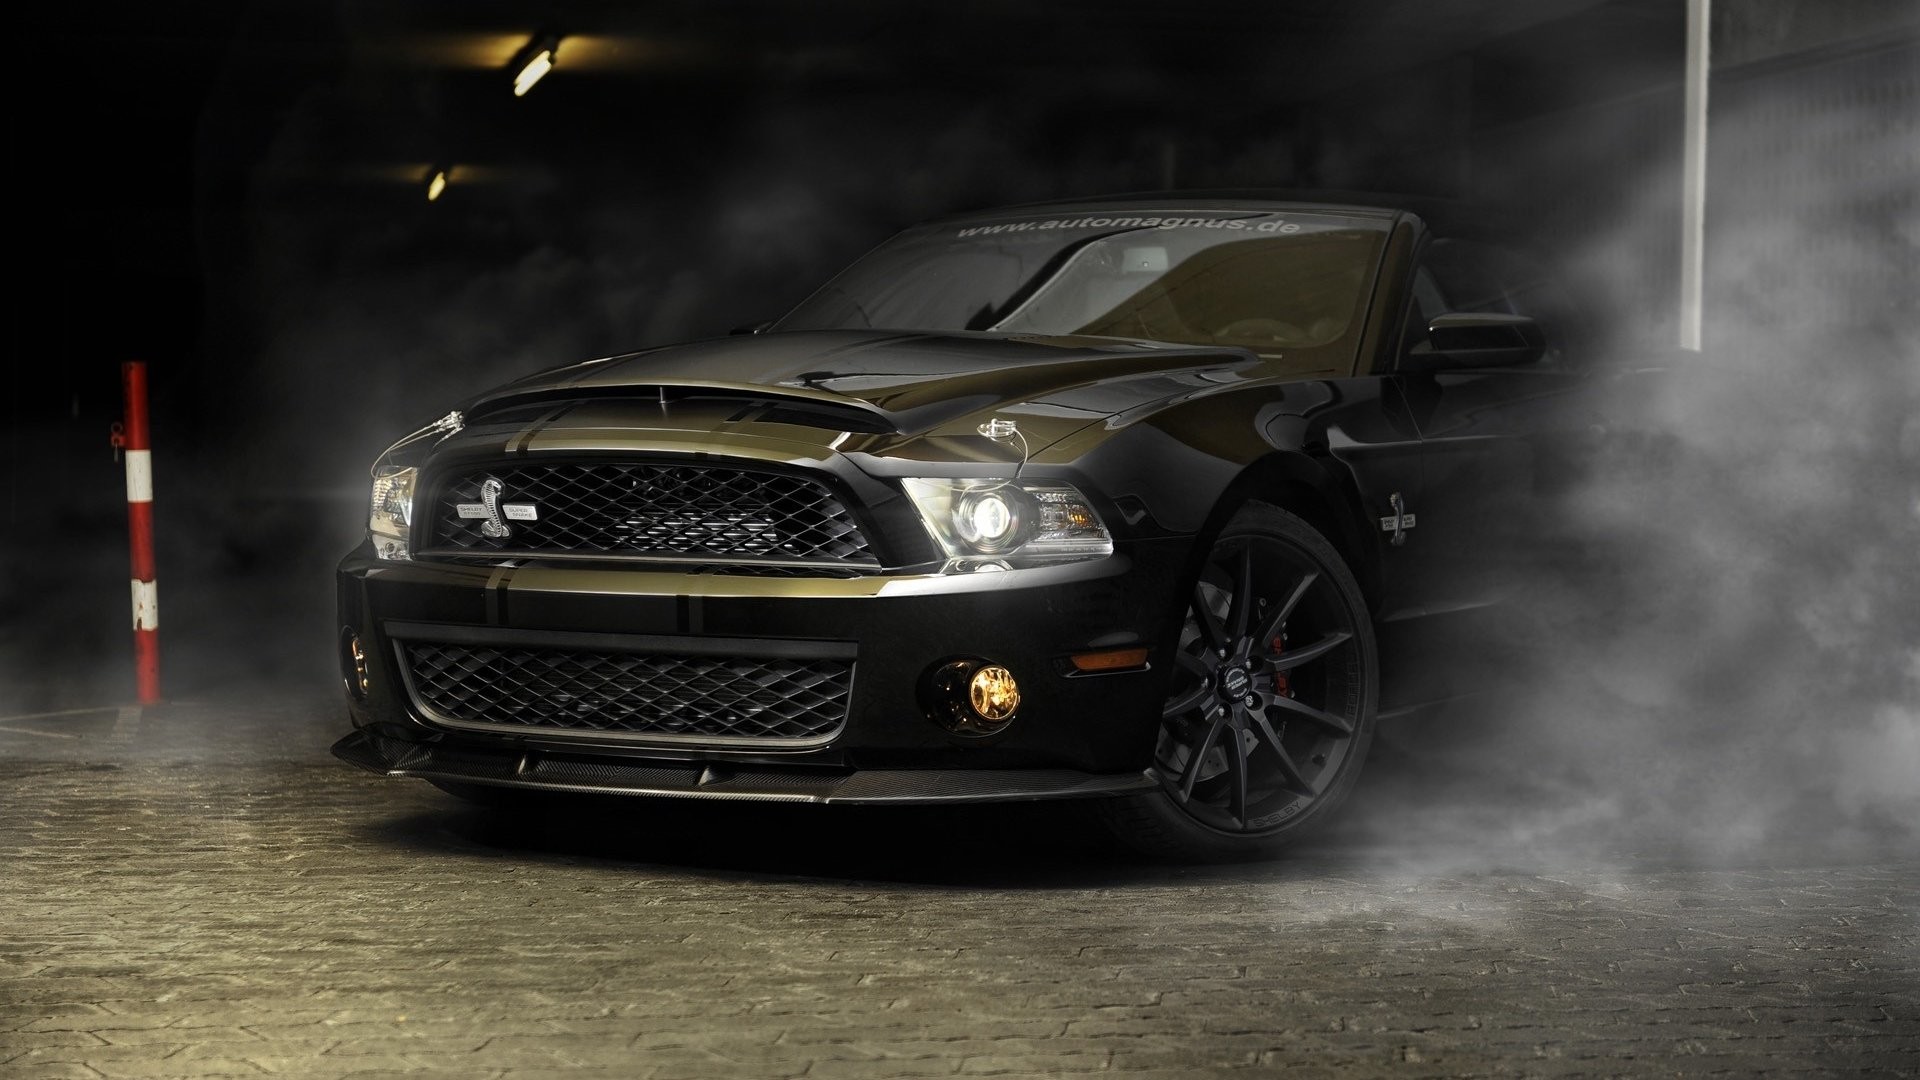 1920x1080 Vehicles - Ford Mustang Shelby Cobra GT 500 Wallpaper